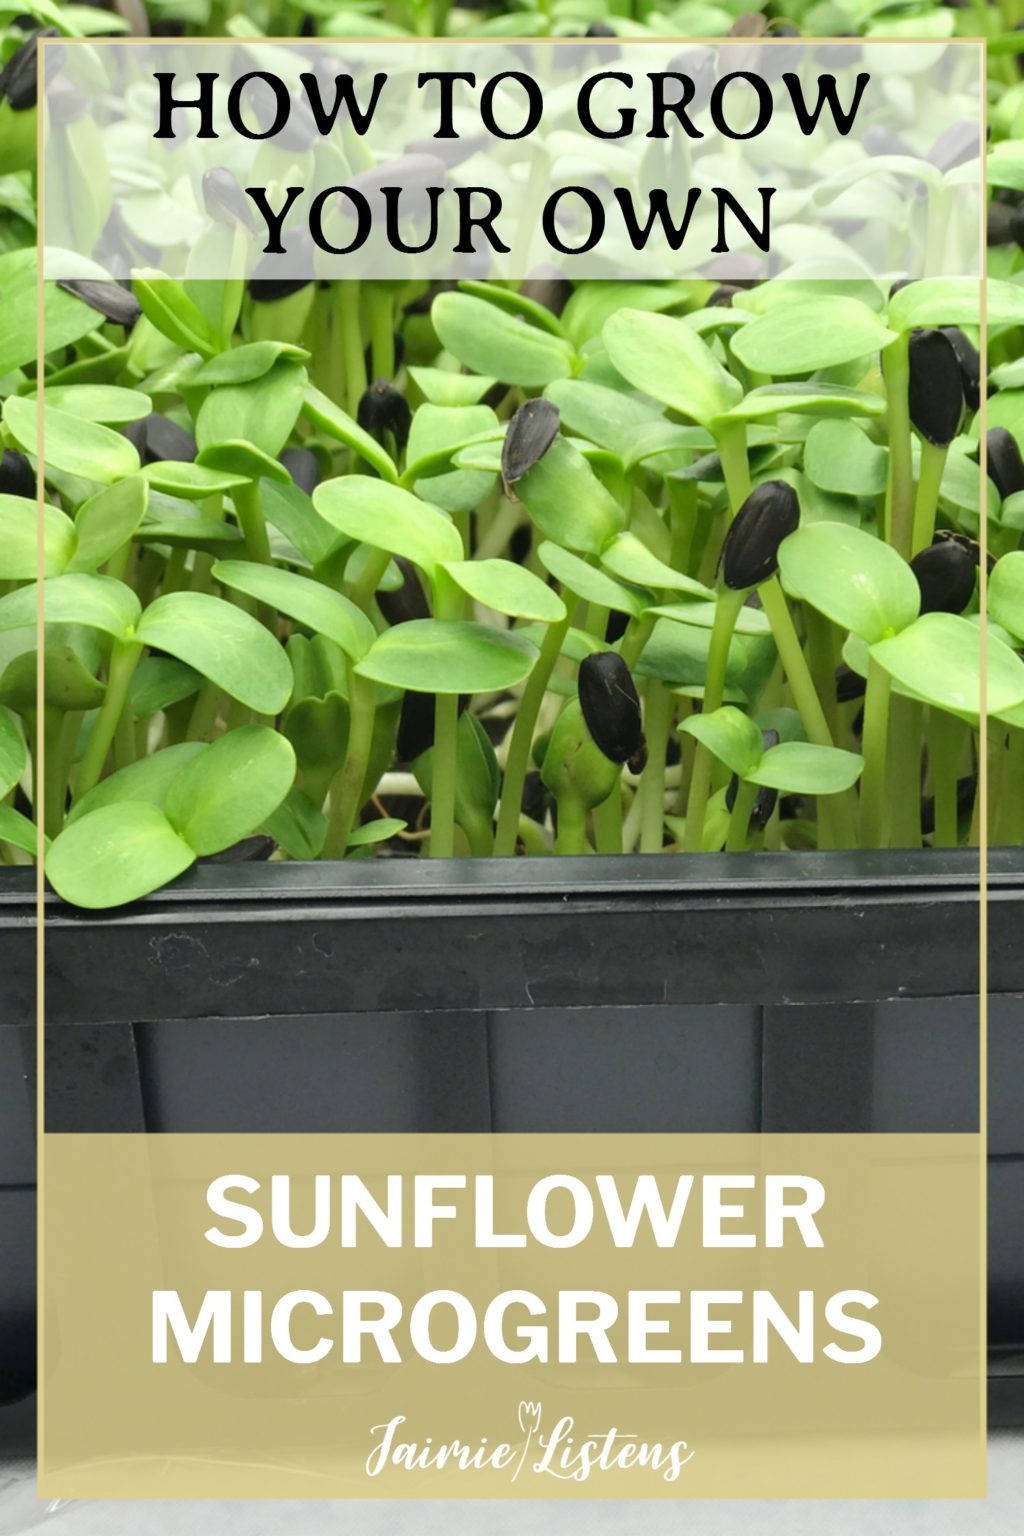 DIY Sunflower Microgreens in 7 Easy Steps - Jaimie Listens: Growing sunflower microgreens is easy, inexpensive and fun! I show you the best practices for the most delicious harvest!